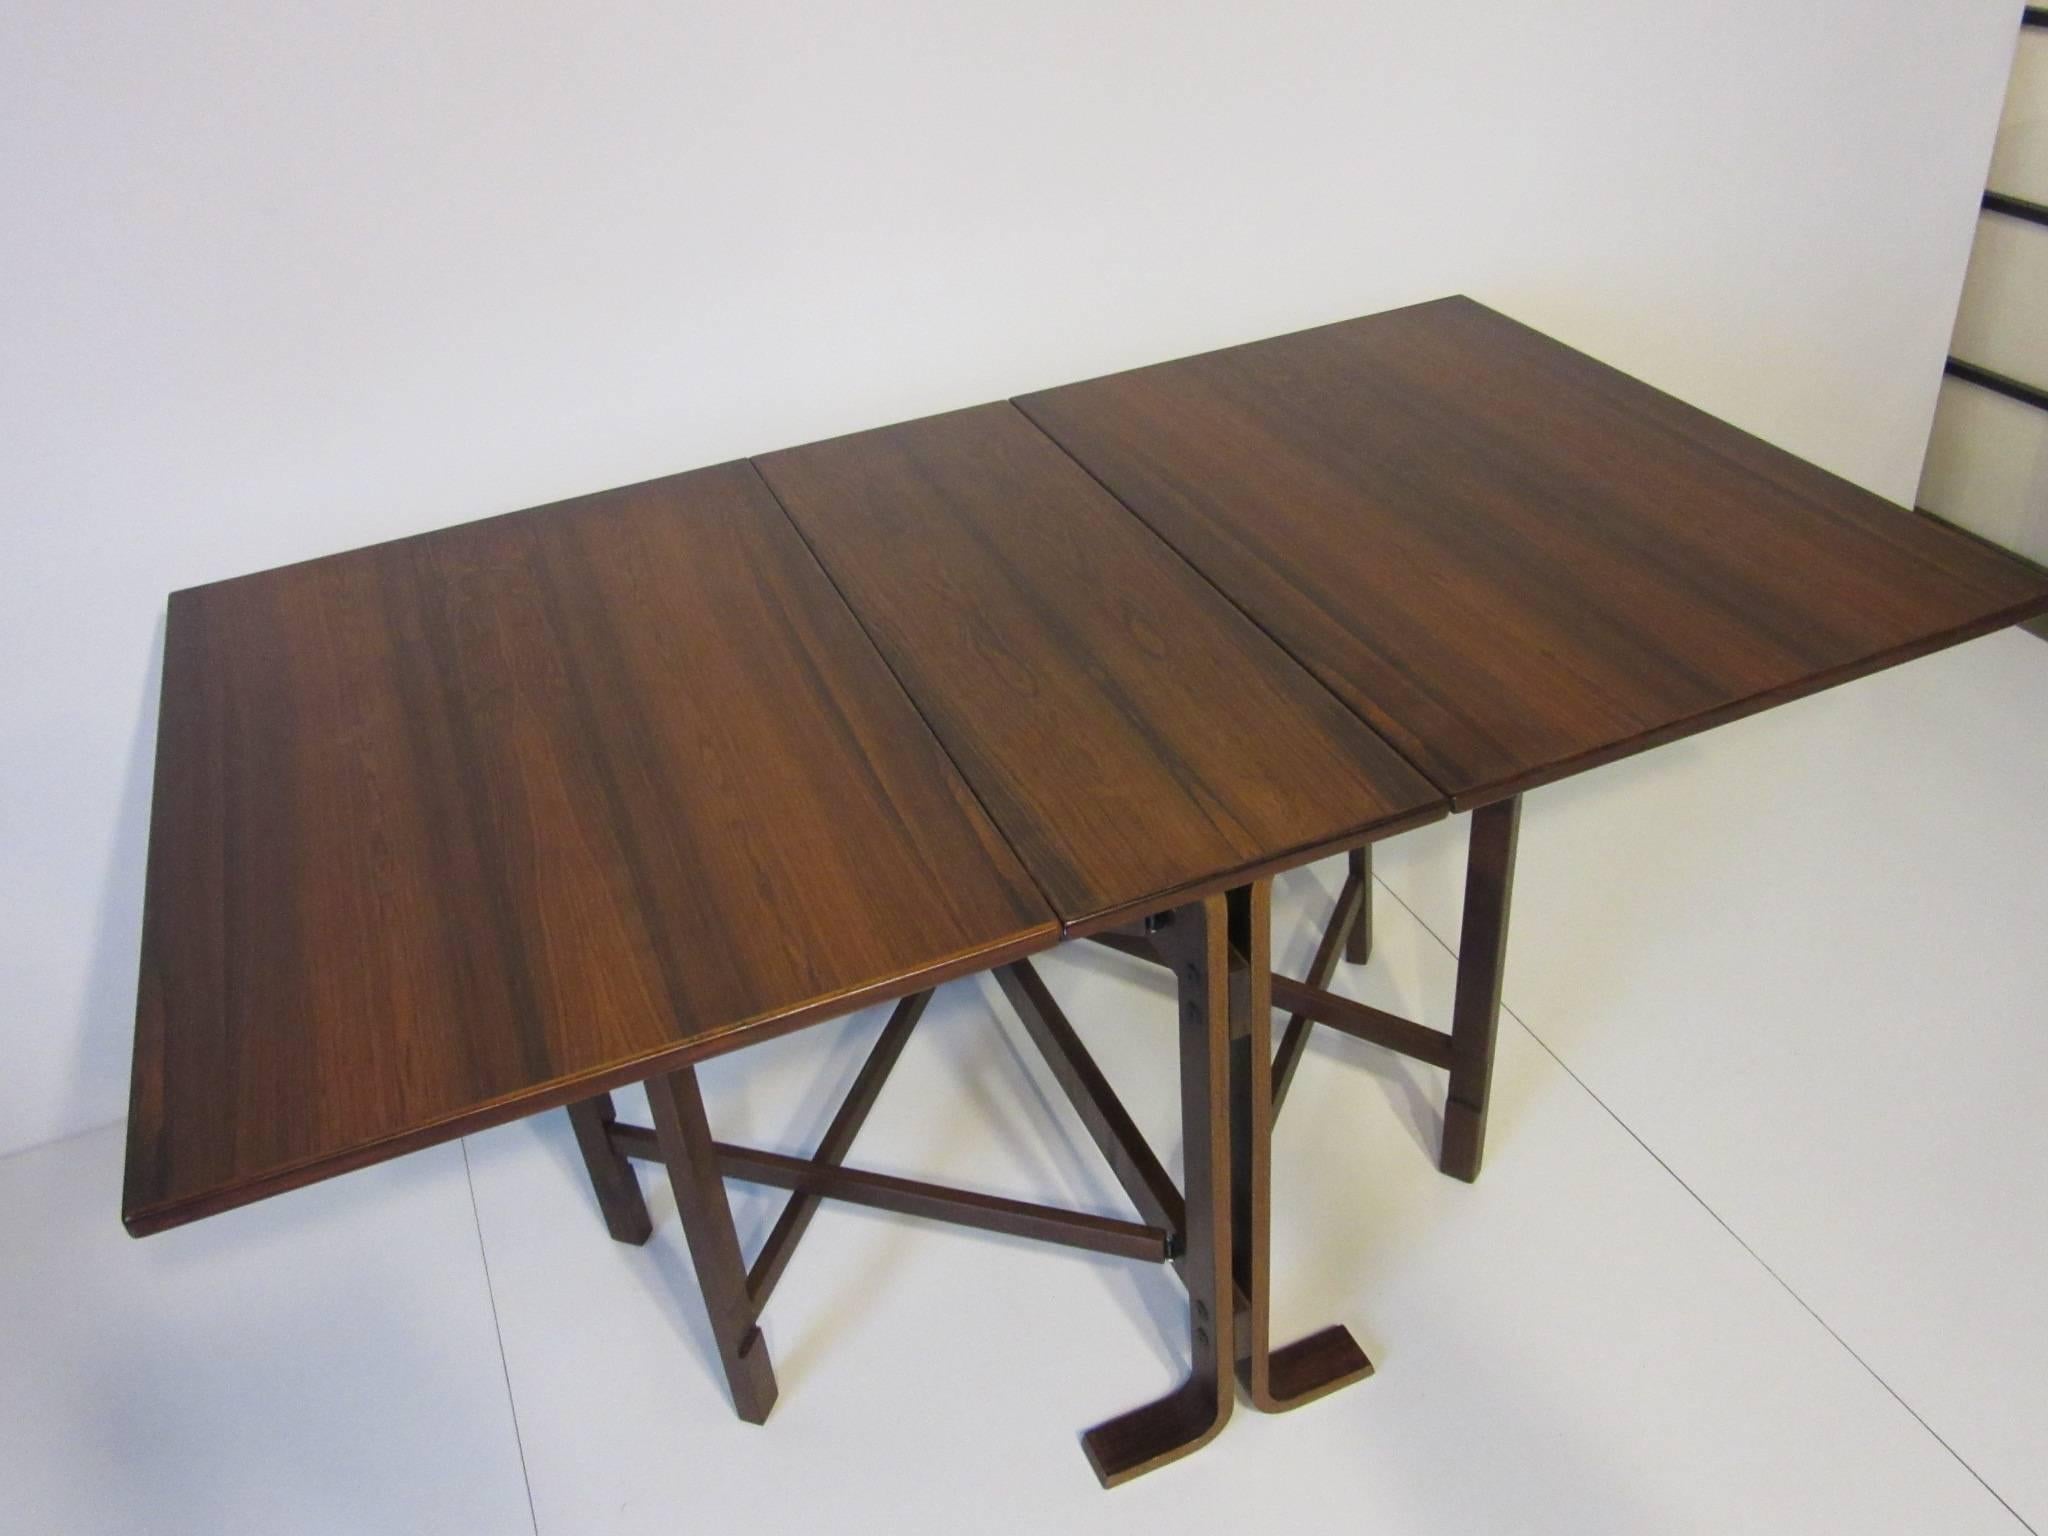 A dark and rich Brazilian rosewood gate leg dining table with two folding leaves which can be fully opened or just one end used. Nice for a small space since the table can be stored or used as a console which when closed measures 11.88 